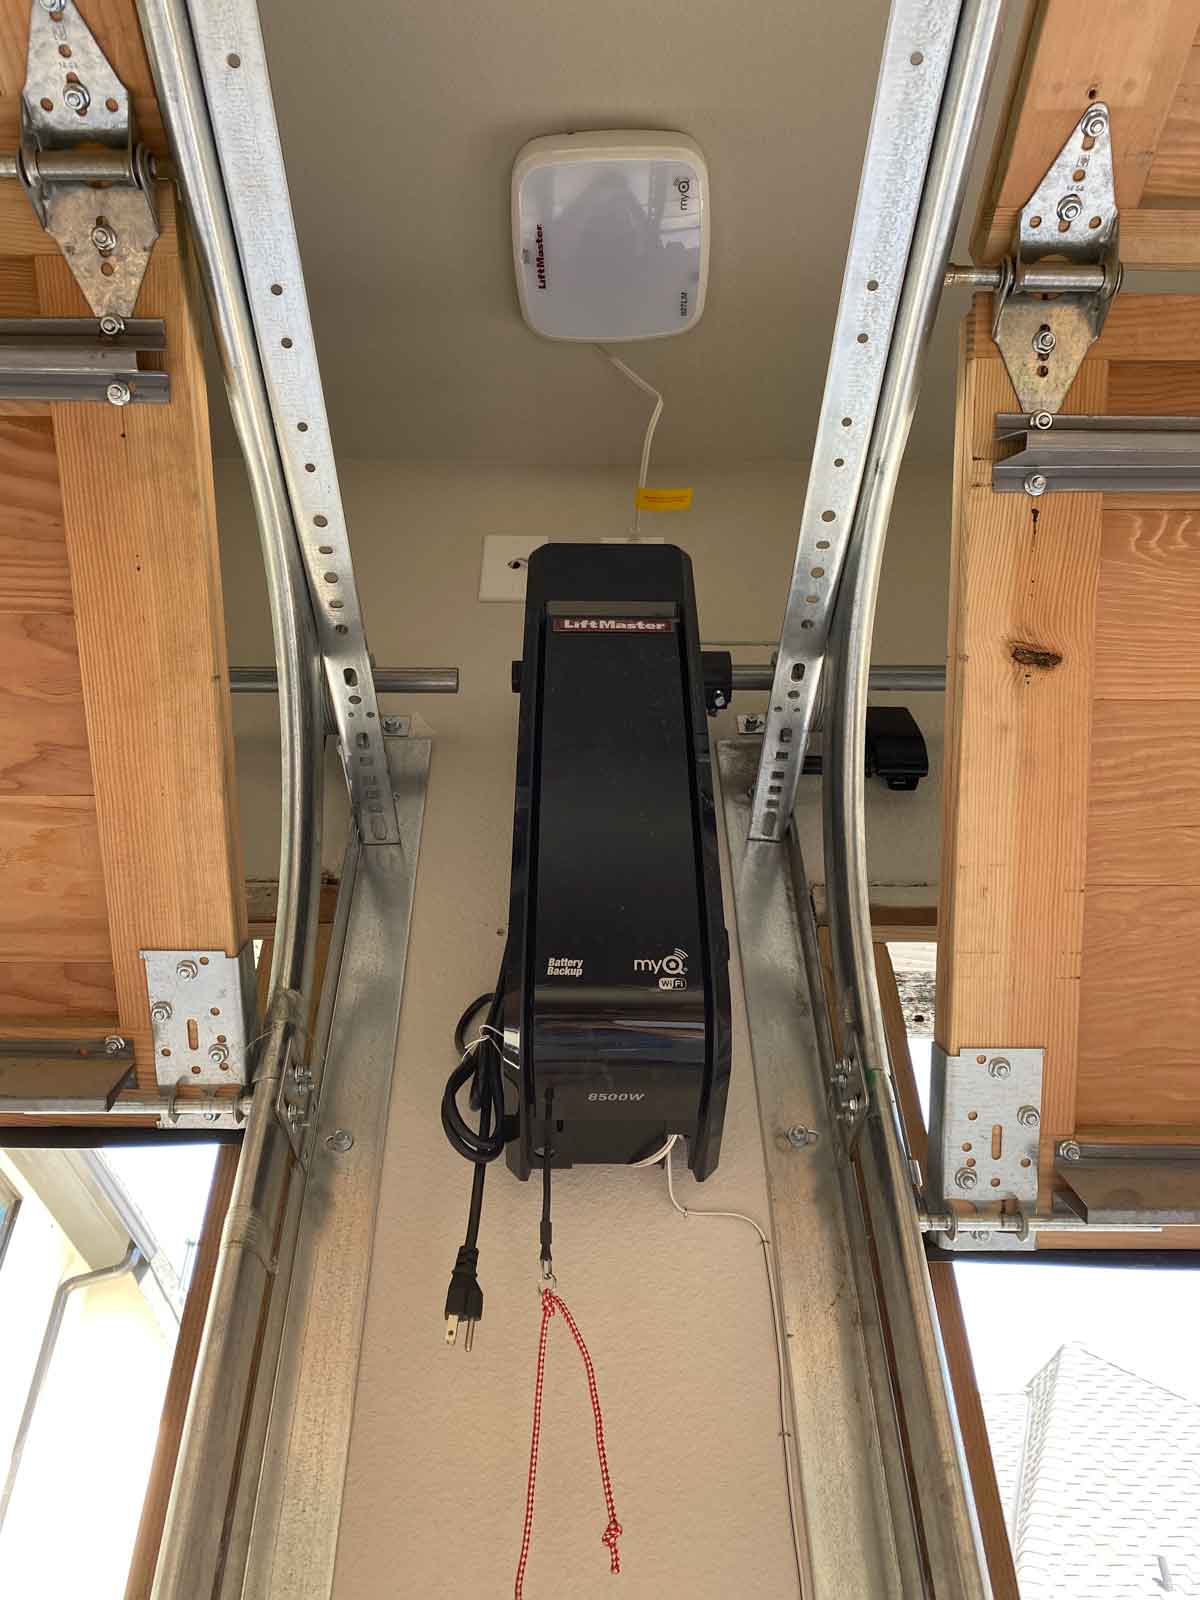 liftmaster-8500w-installed